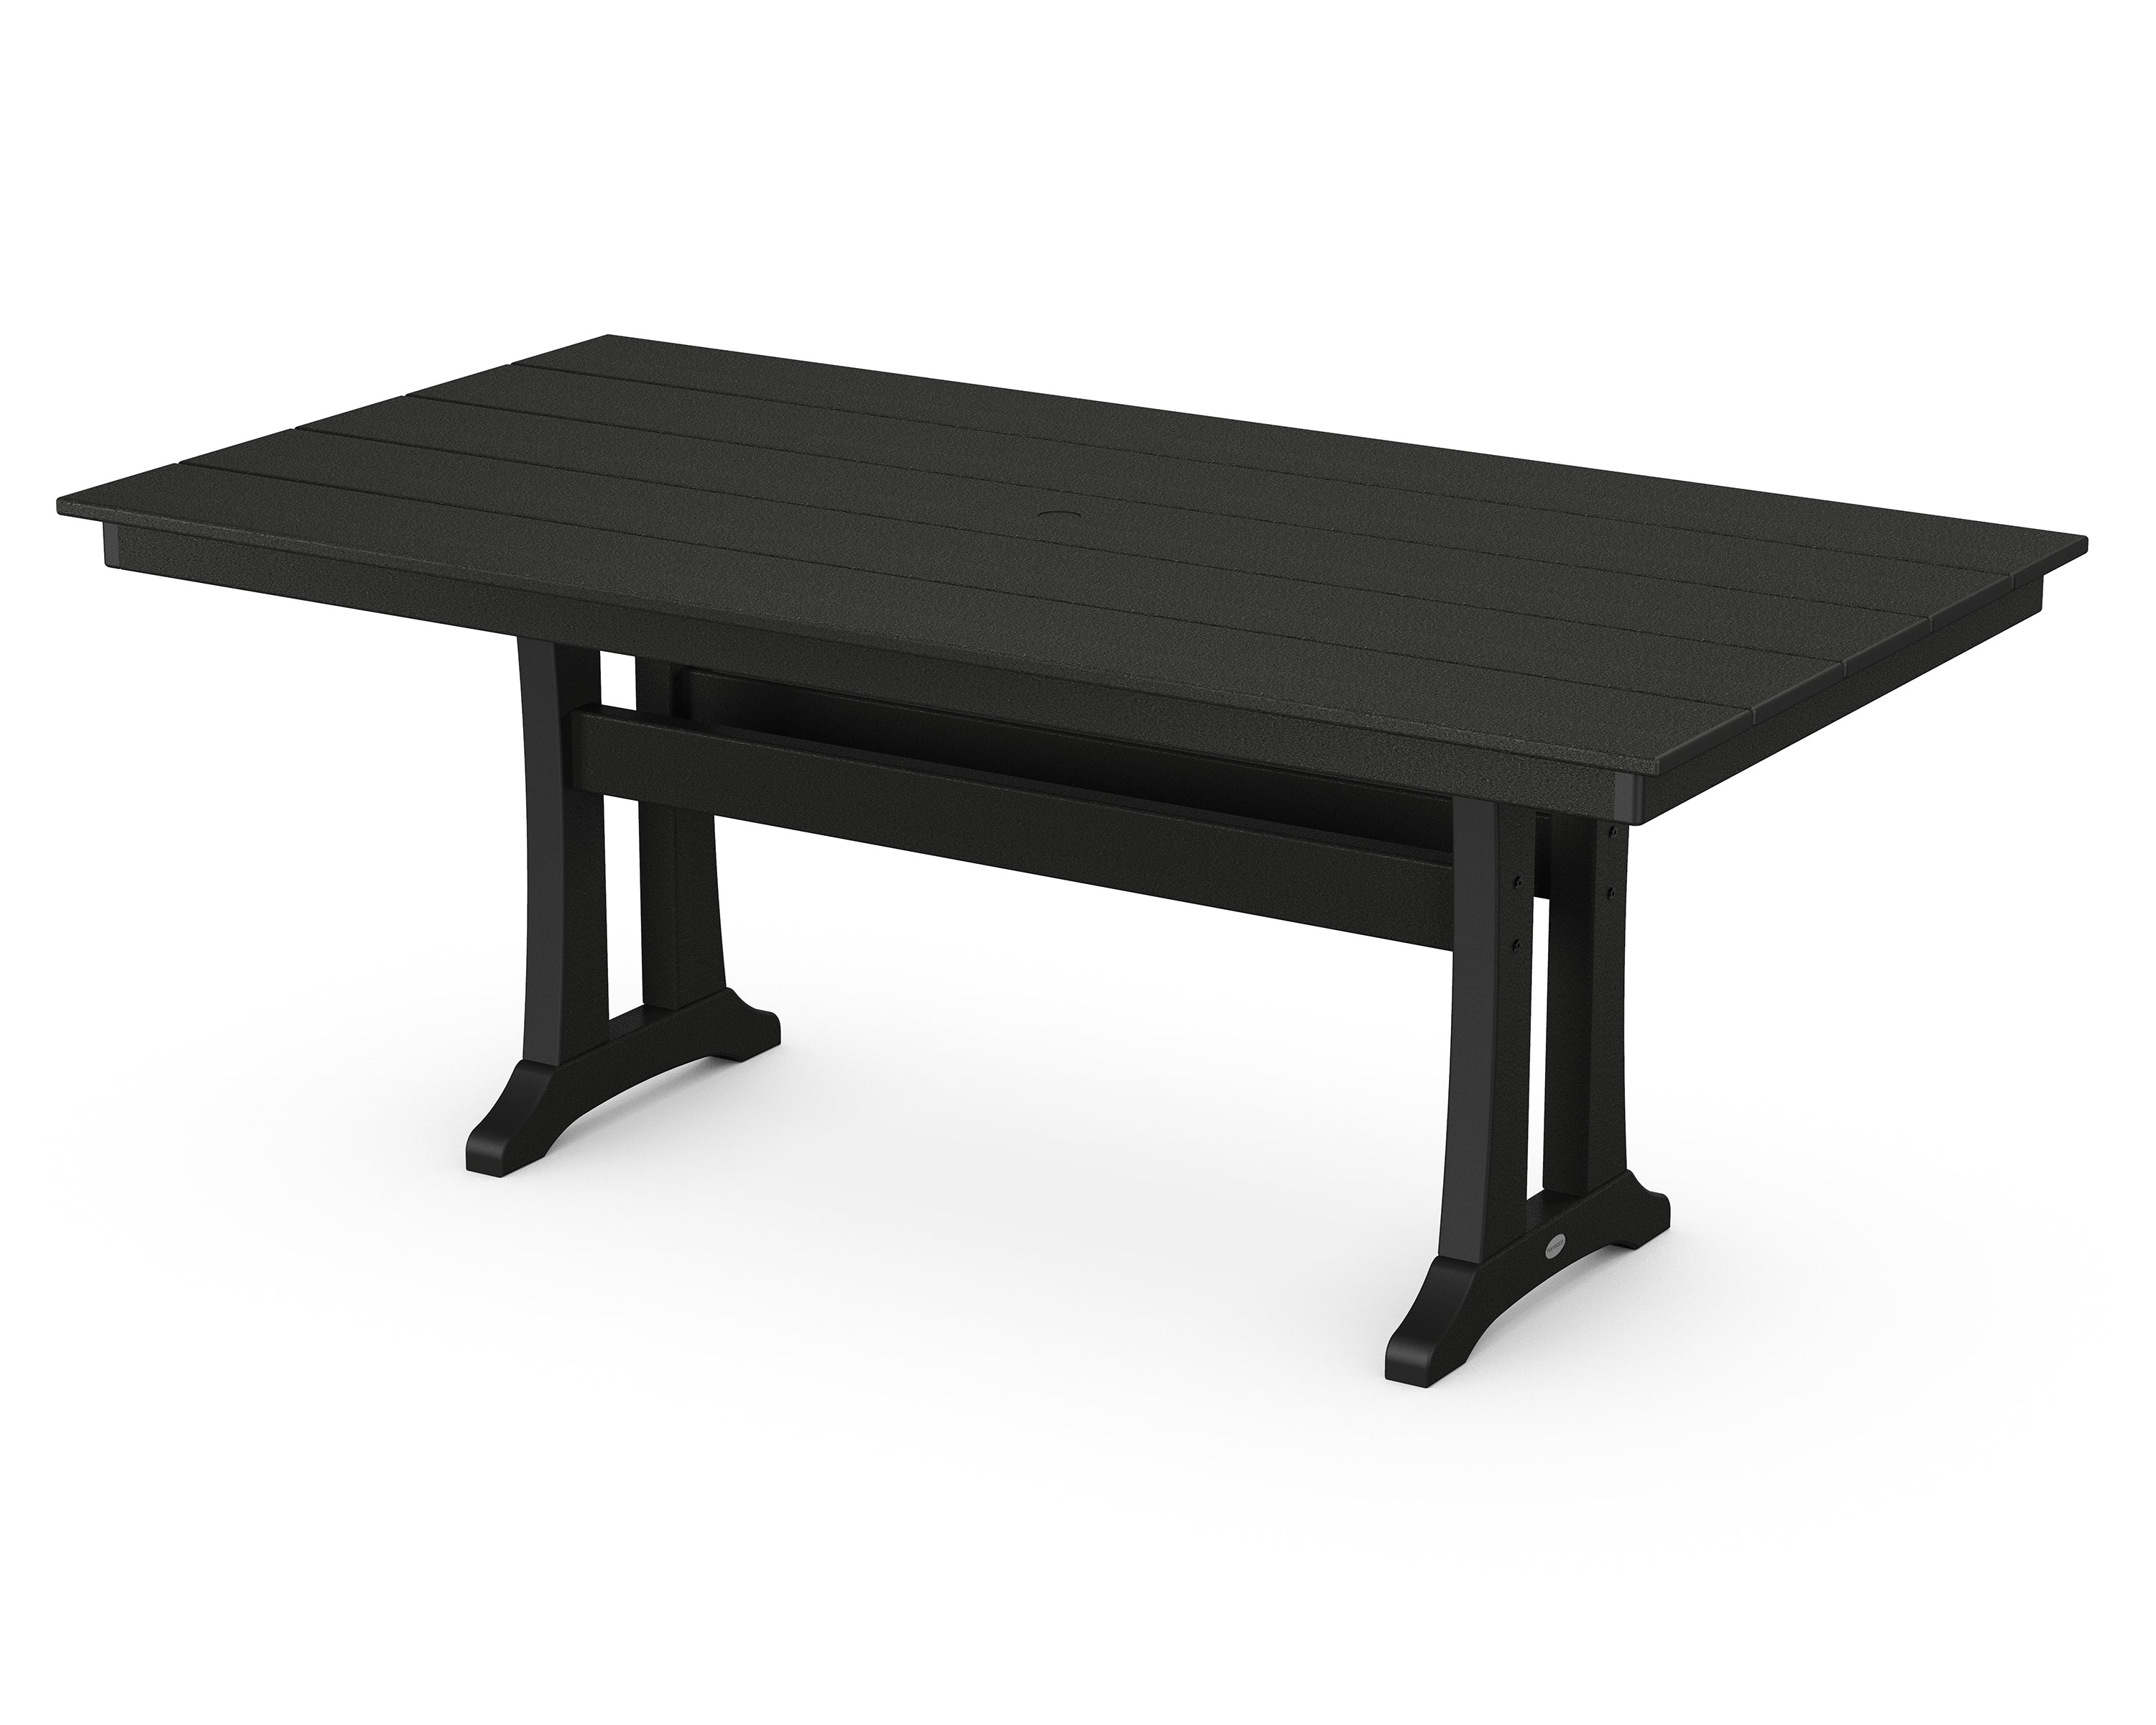 POLYWOOD Farmhouse Trestle 37 inch x 72 inch Dining Table Outdoor Tables Black 12041638